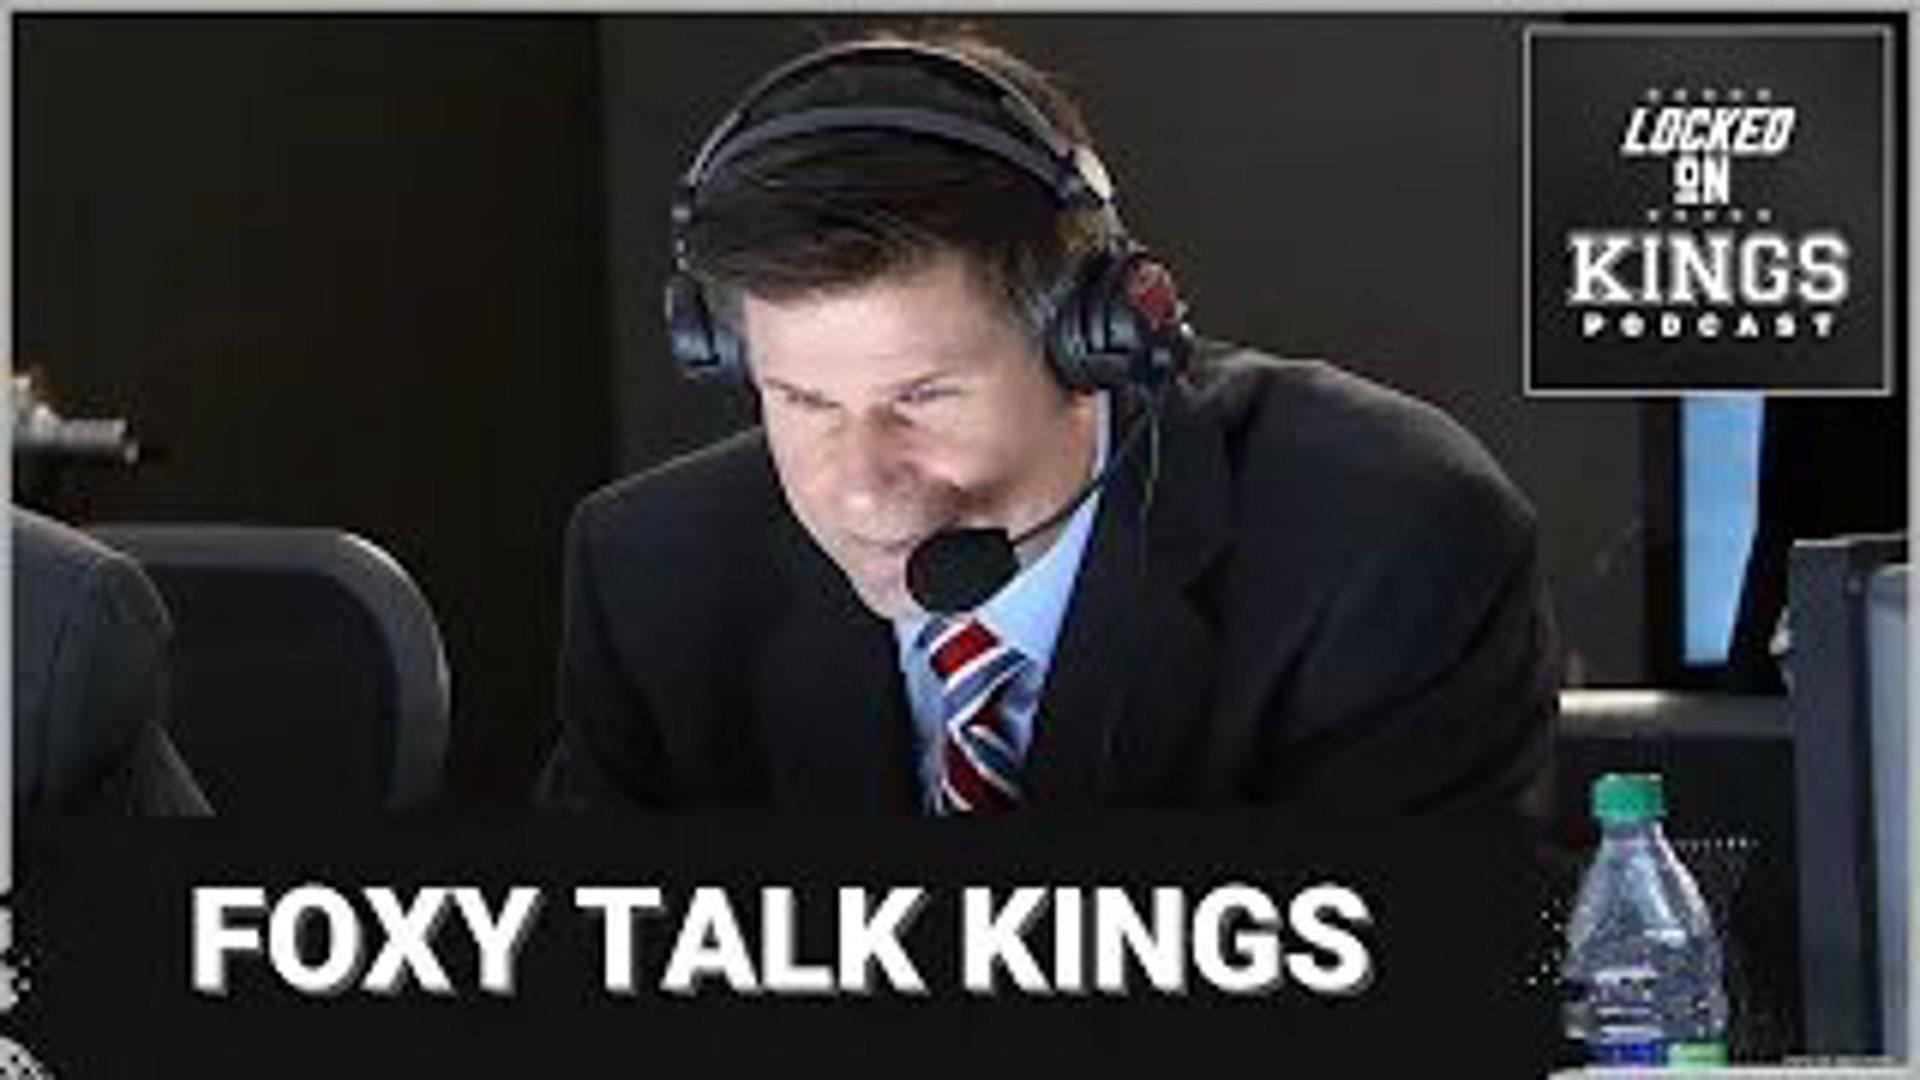 The LA Kings enter this offseason with many questions. How will they improve for next season? What will they do with PLD? What younger players can step up?